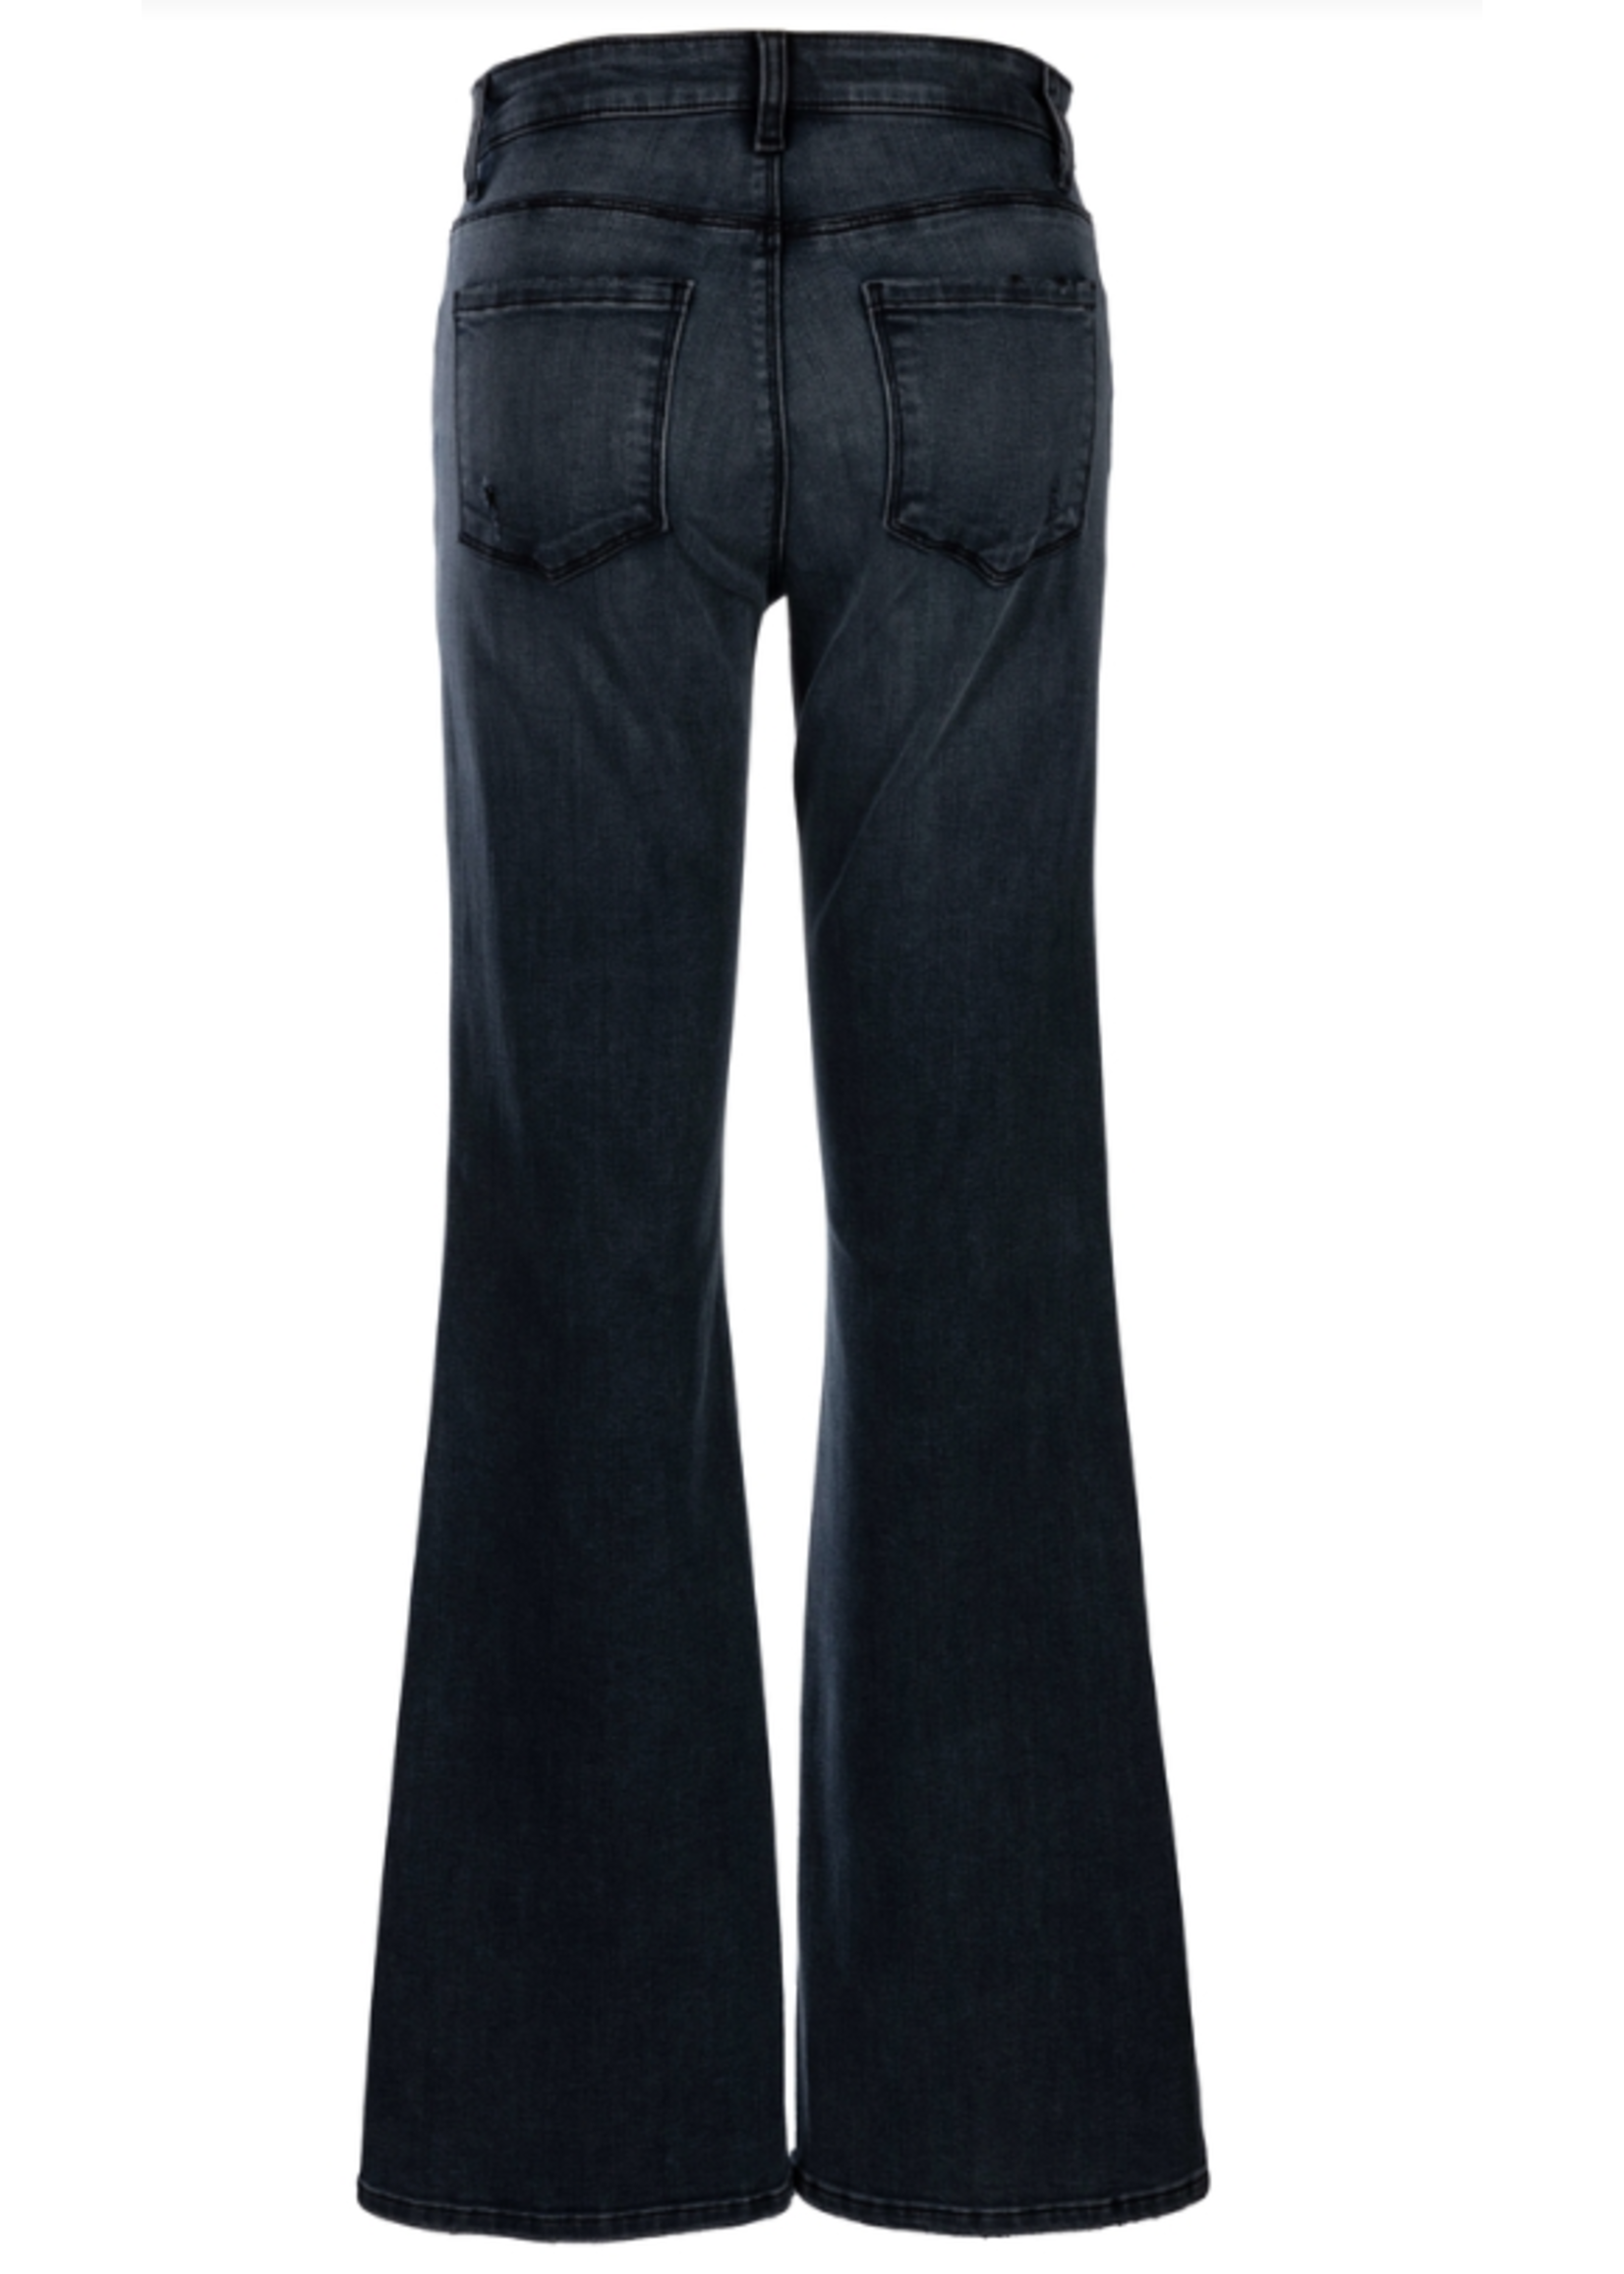 KUT FROM THE KLOTH Ana High Rise Fab Ab Flare Jeans